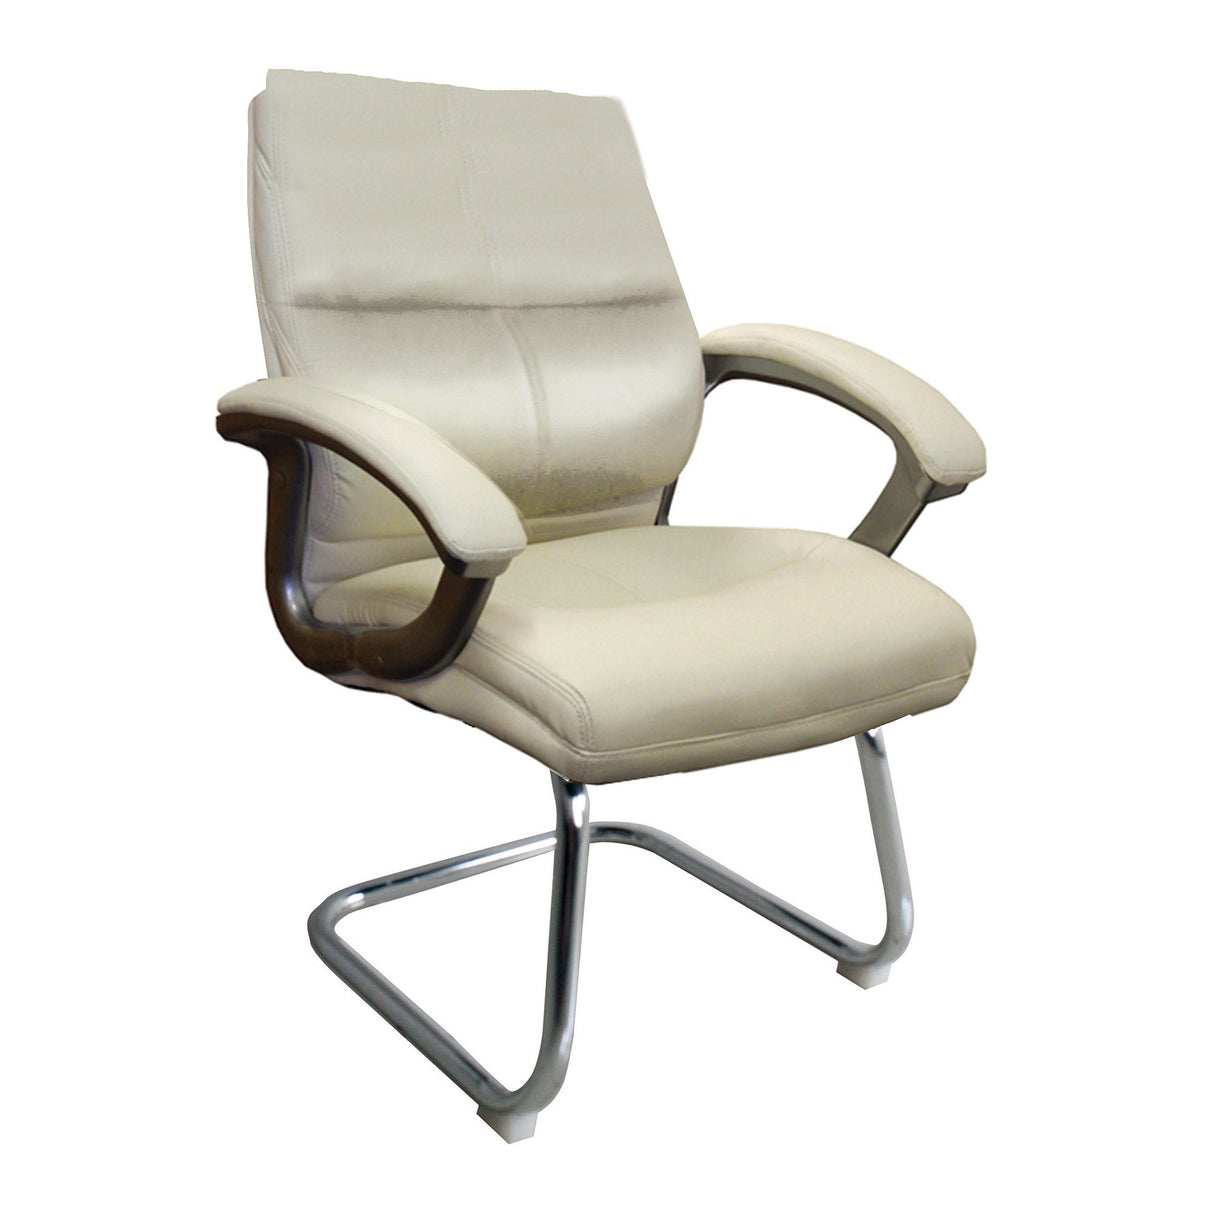 Nautilus Designs Greenwich High Back Leather Effect Executive Visitor Armchair with Contoured Design Backrest and Chrome Base - Cream